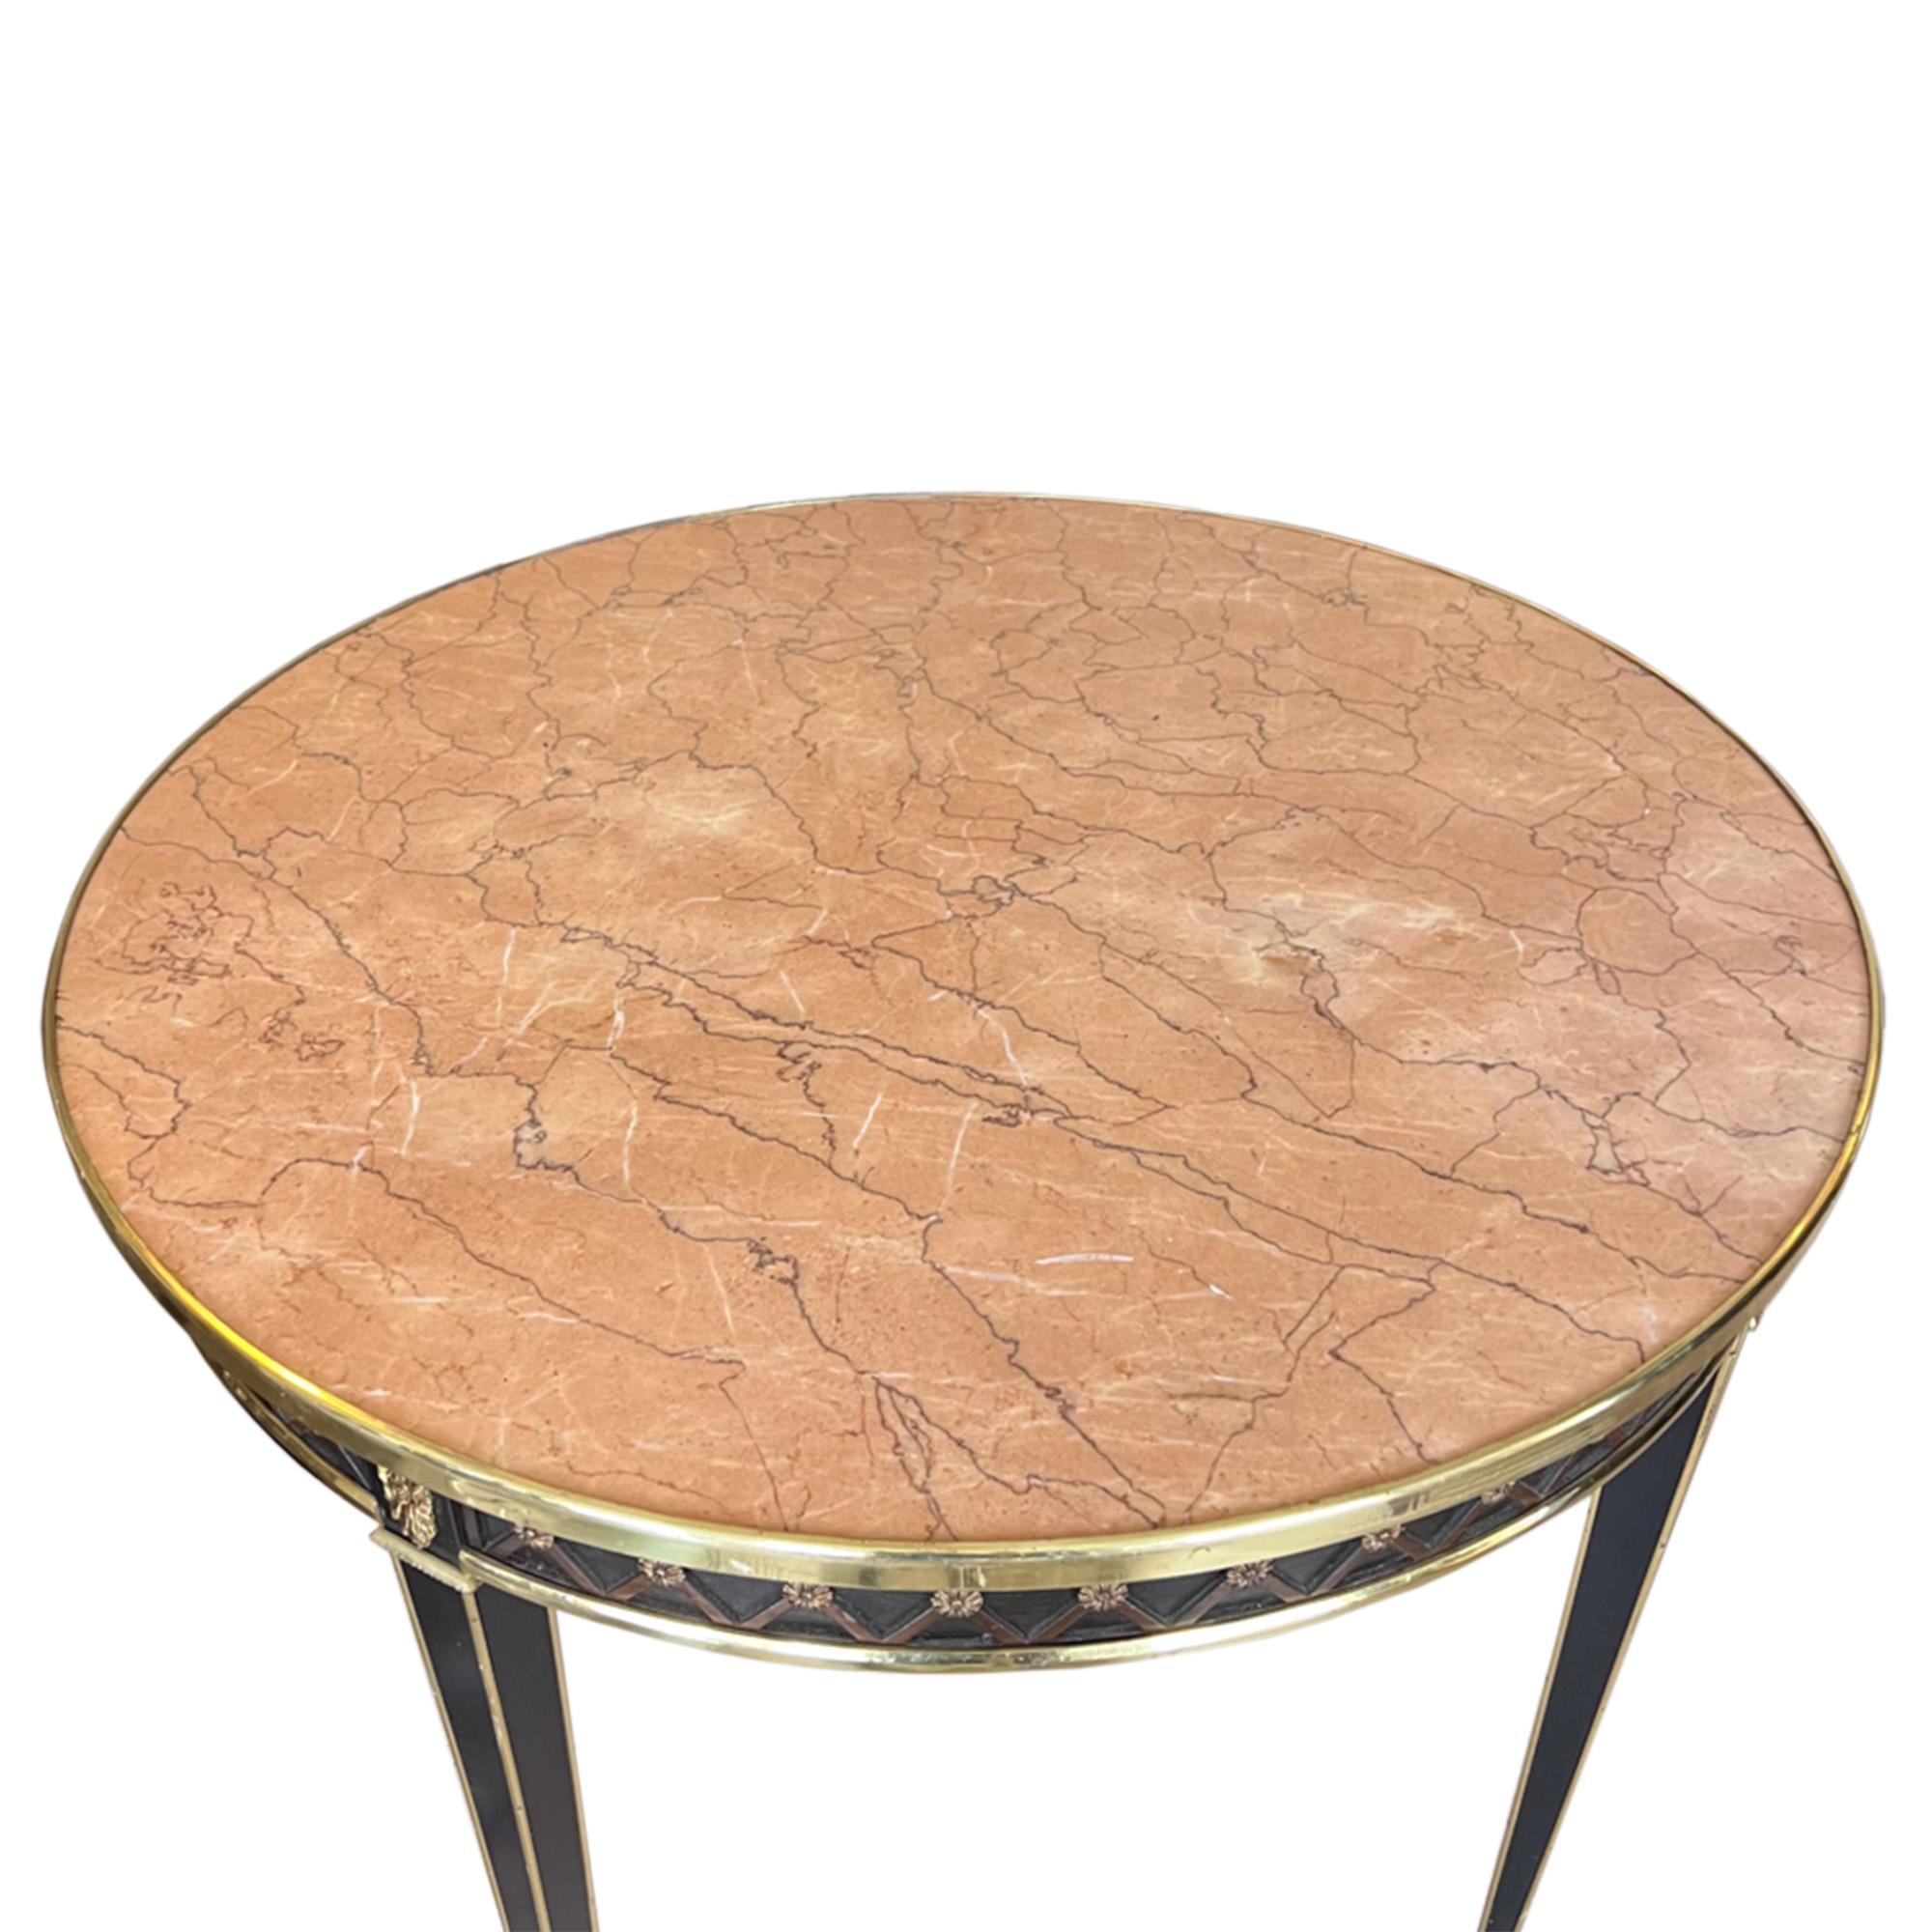 This highly decorative centre table was made in France in the 1950s to a neo classical design and in the style of the luxury designer brand, Maison Jansen. 

It's made with ebonised wood and a beautiful marble top - with brass detailing and a